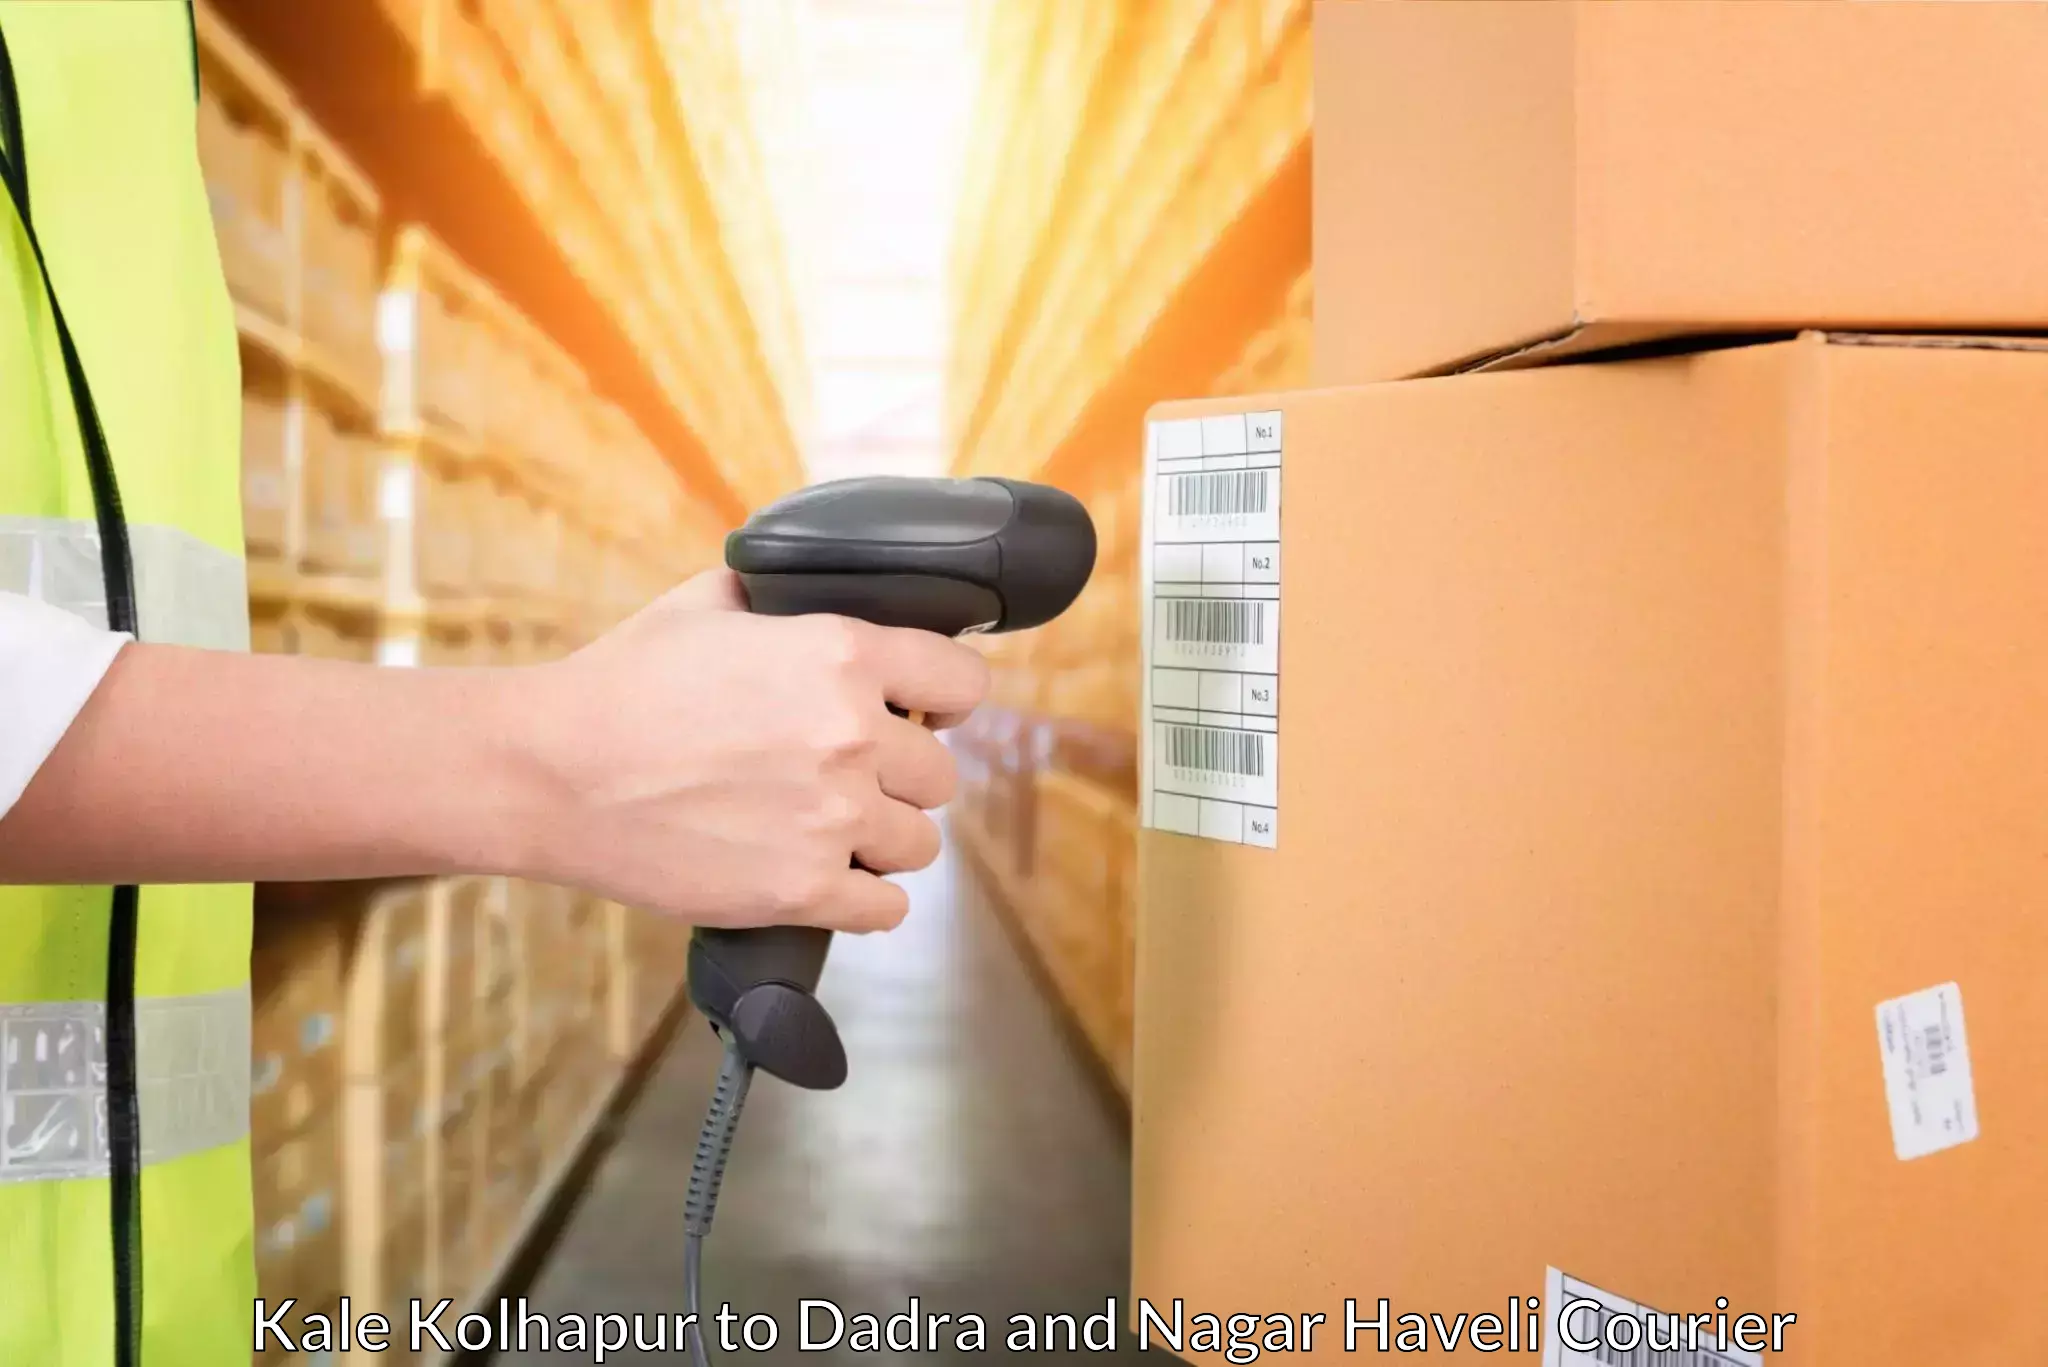 24-hour courier services Kale Kolhapur to Dadra and Nagar Haveli